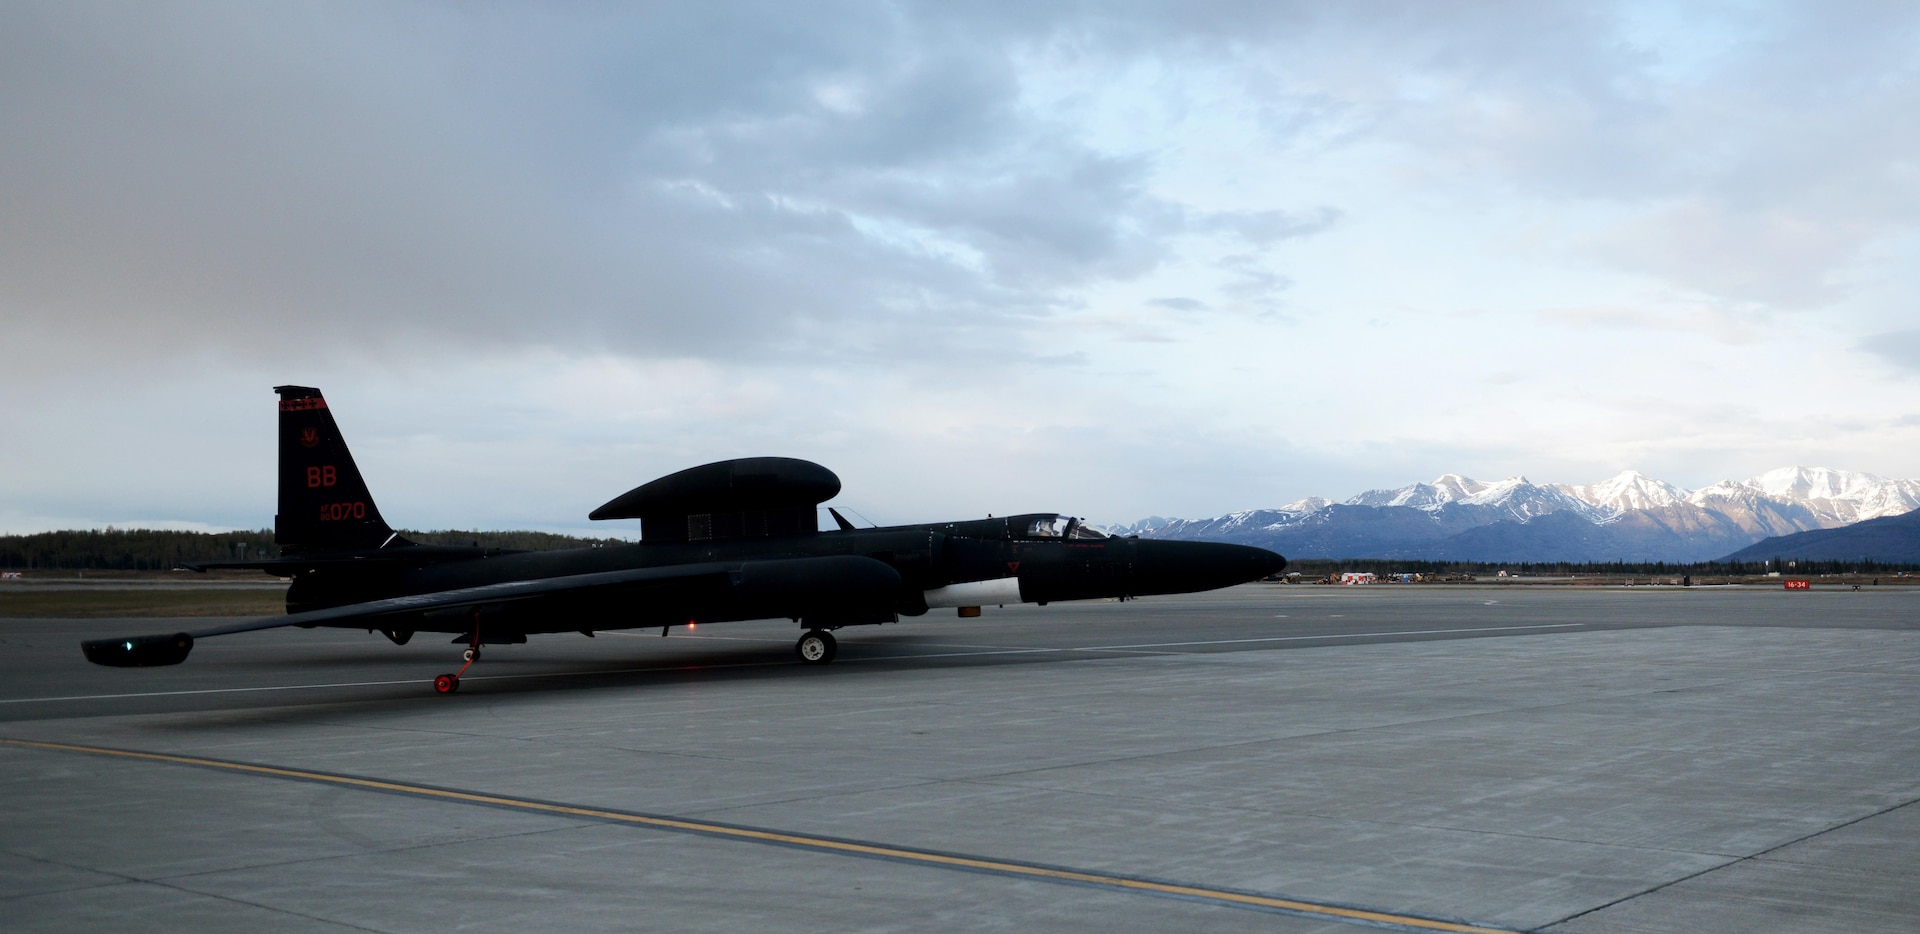 A U-2 Dragon Lady taxis after landing during exercise Northern Edge 17 at Joint Base Elmendorf-Richardson, Alaska, May 8, 2017. The U-2 participated for the first time in Northern Edge, which is a biennial joint training exercise involving approximately 6,000 personnel and 200 fixed-wing aircraft, and dates back to 1975. (U.S. Air Force photo/Staff Sgt. Jeffrey Schultze)